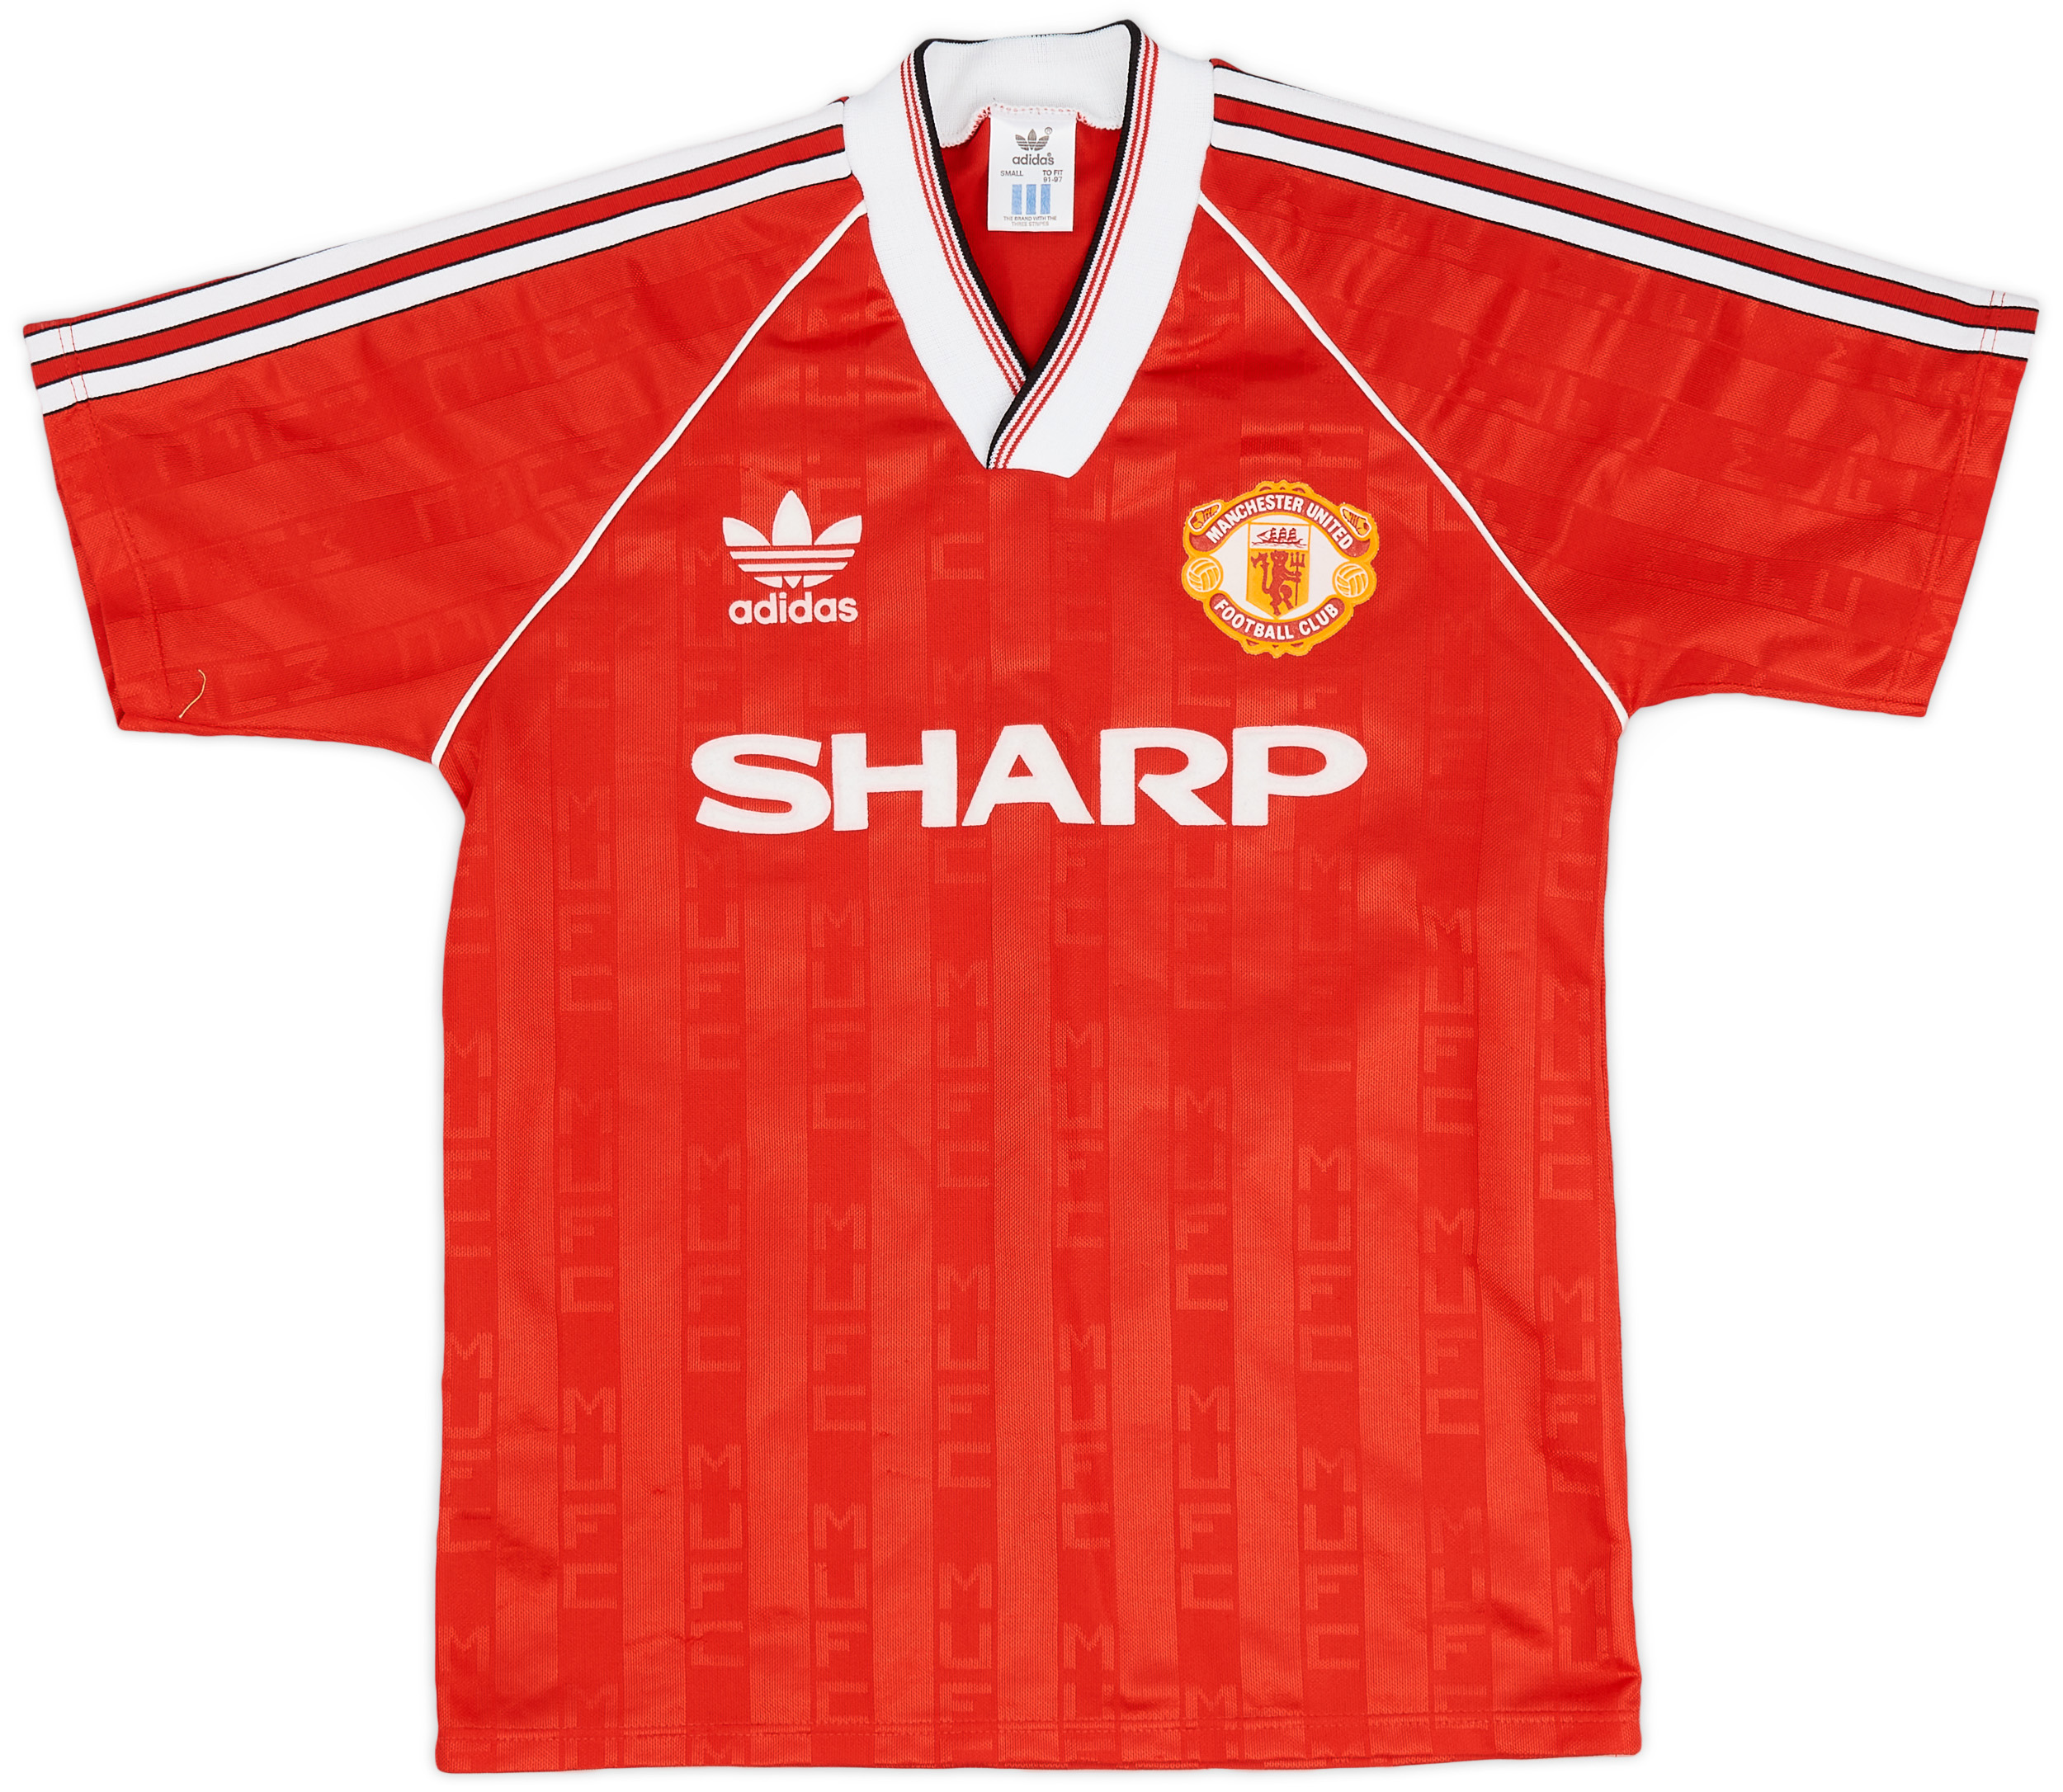 1988-90 Manchester United Home Shirt - 8/10 - ()